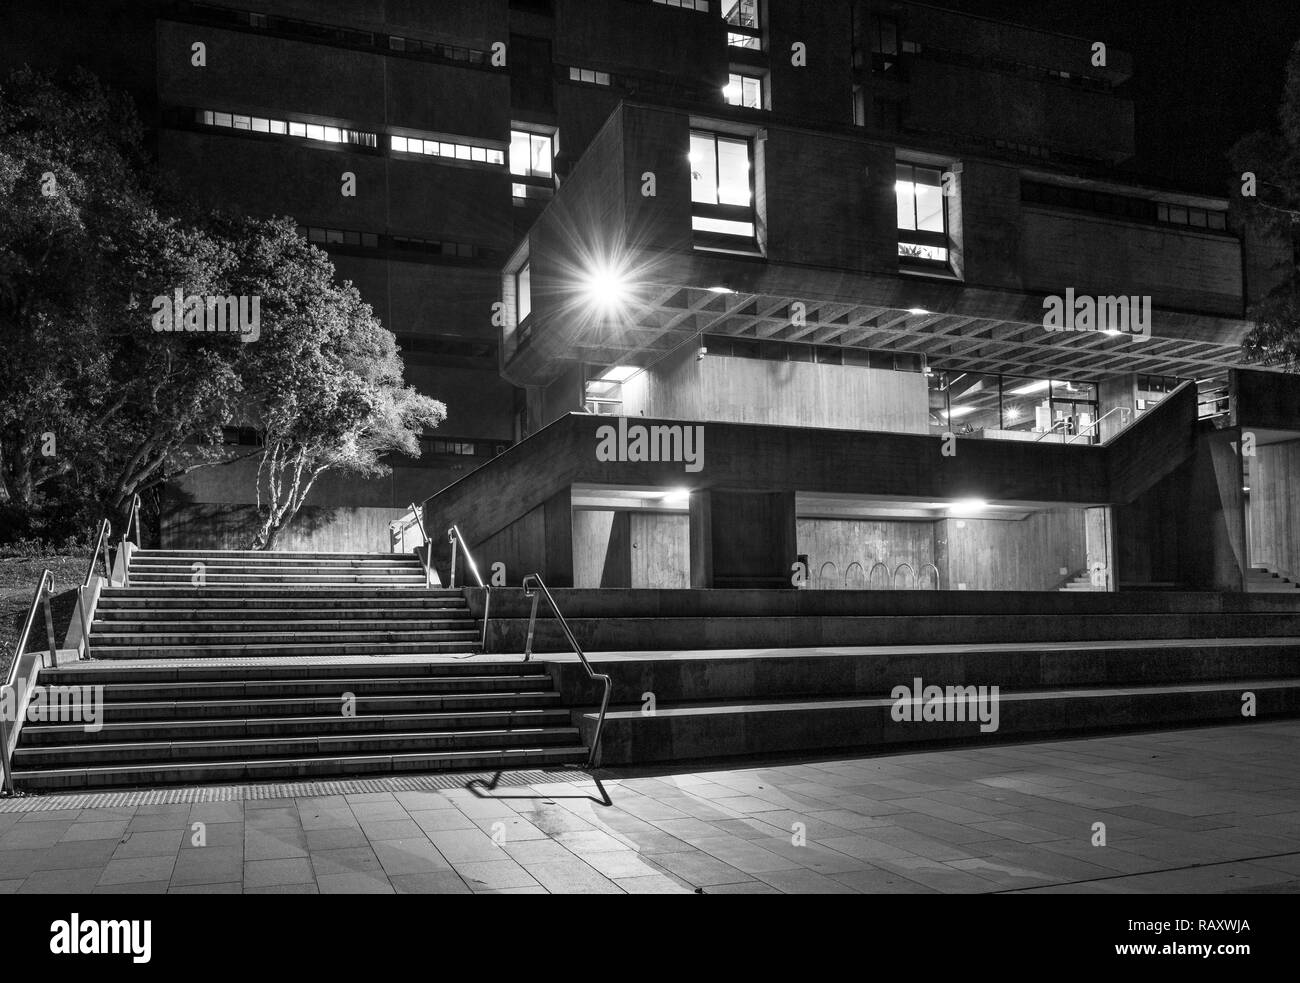 brutalistic architecture seen at night Stock Photo